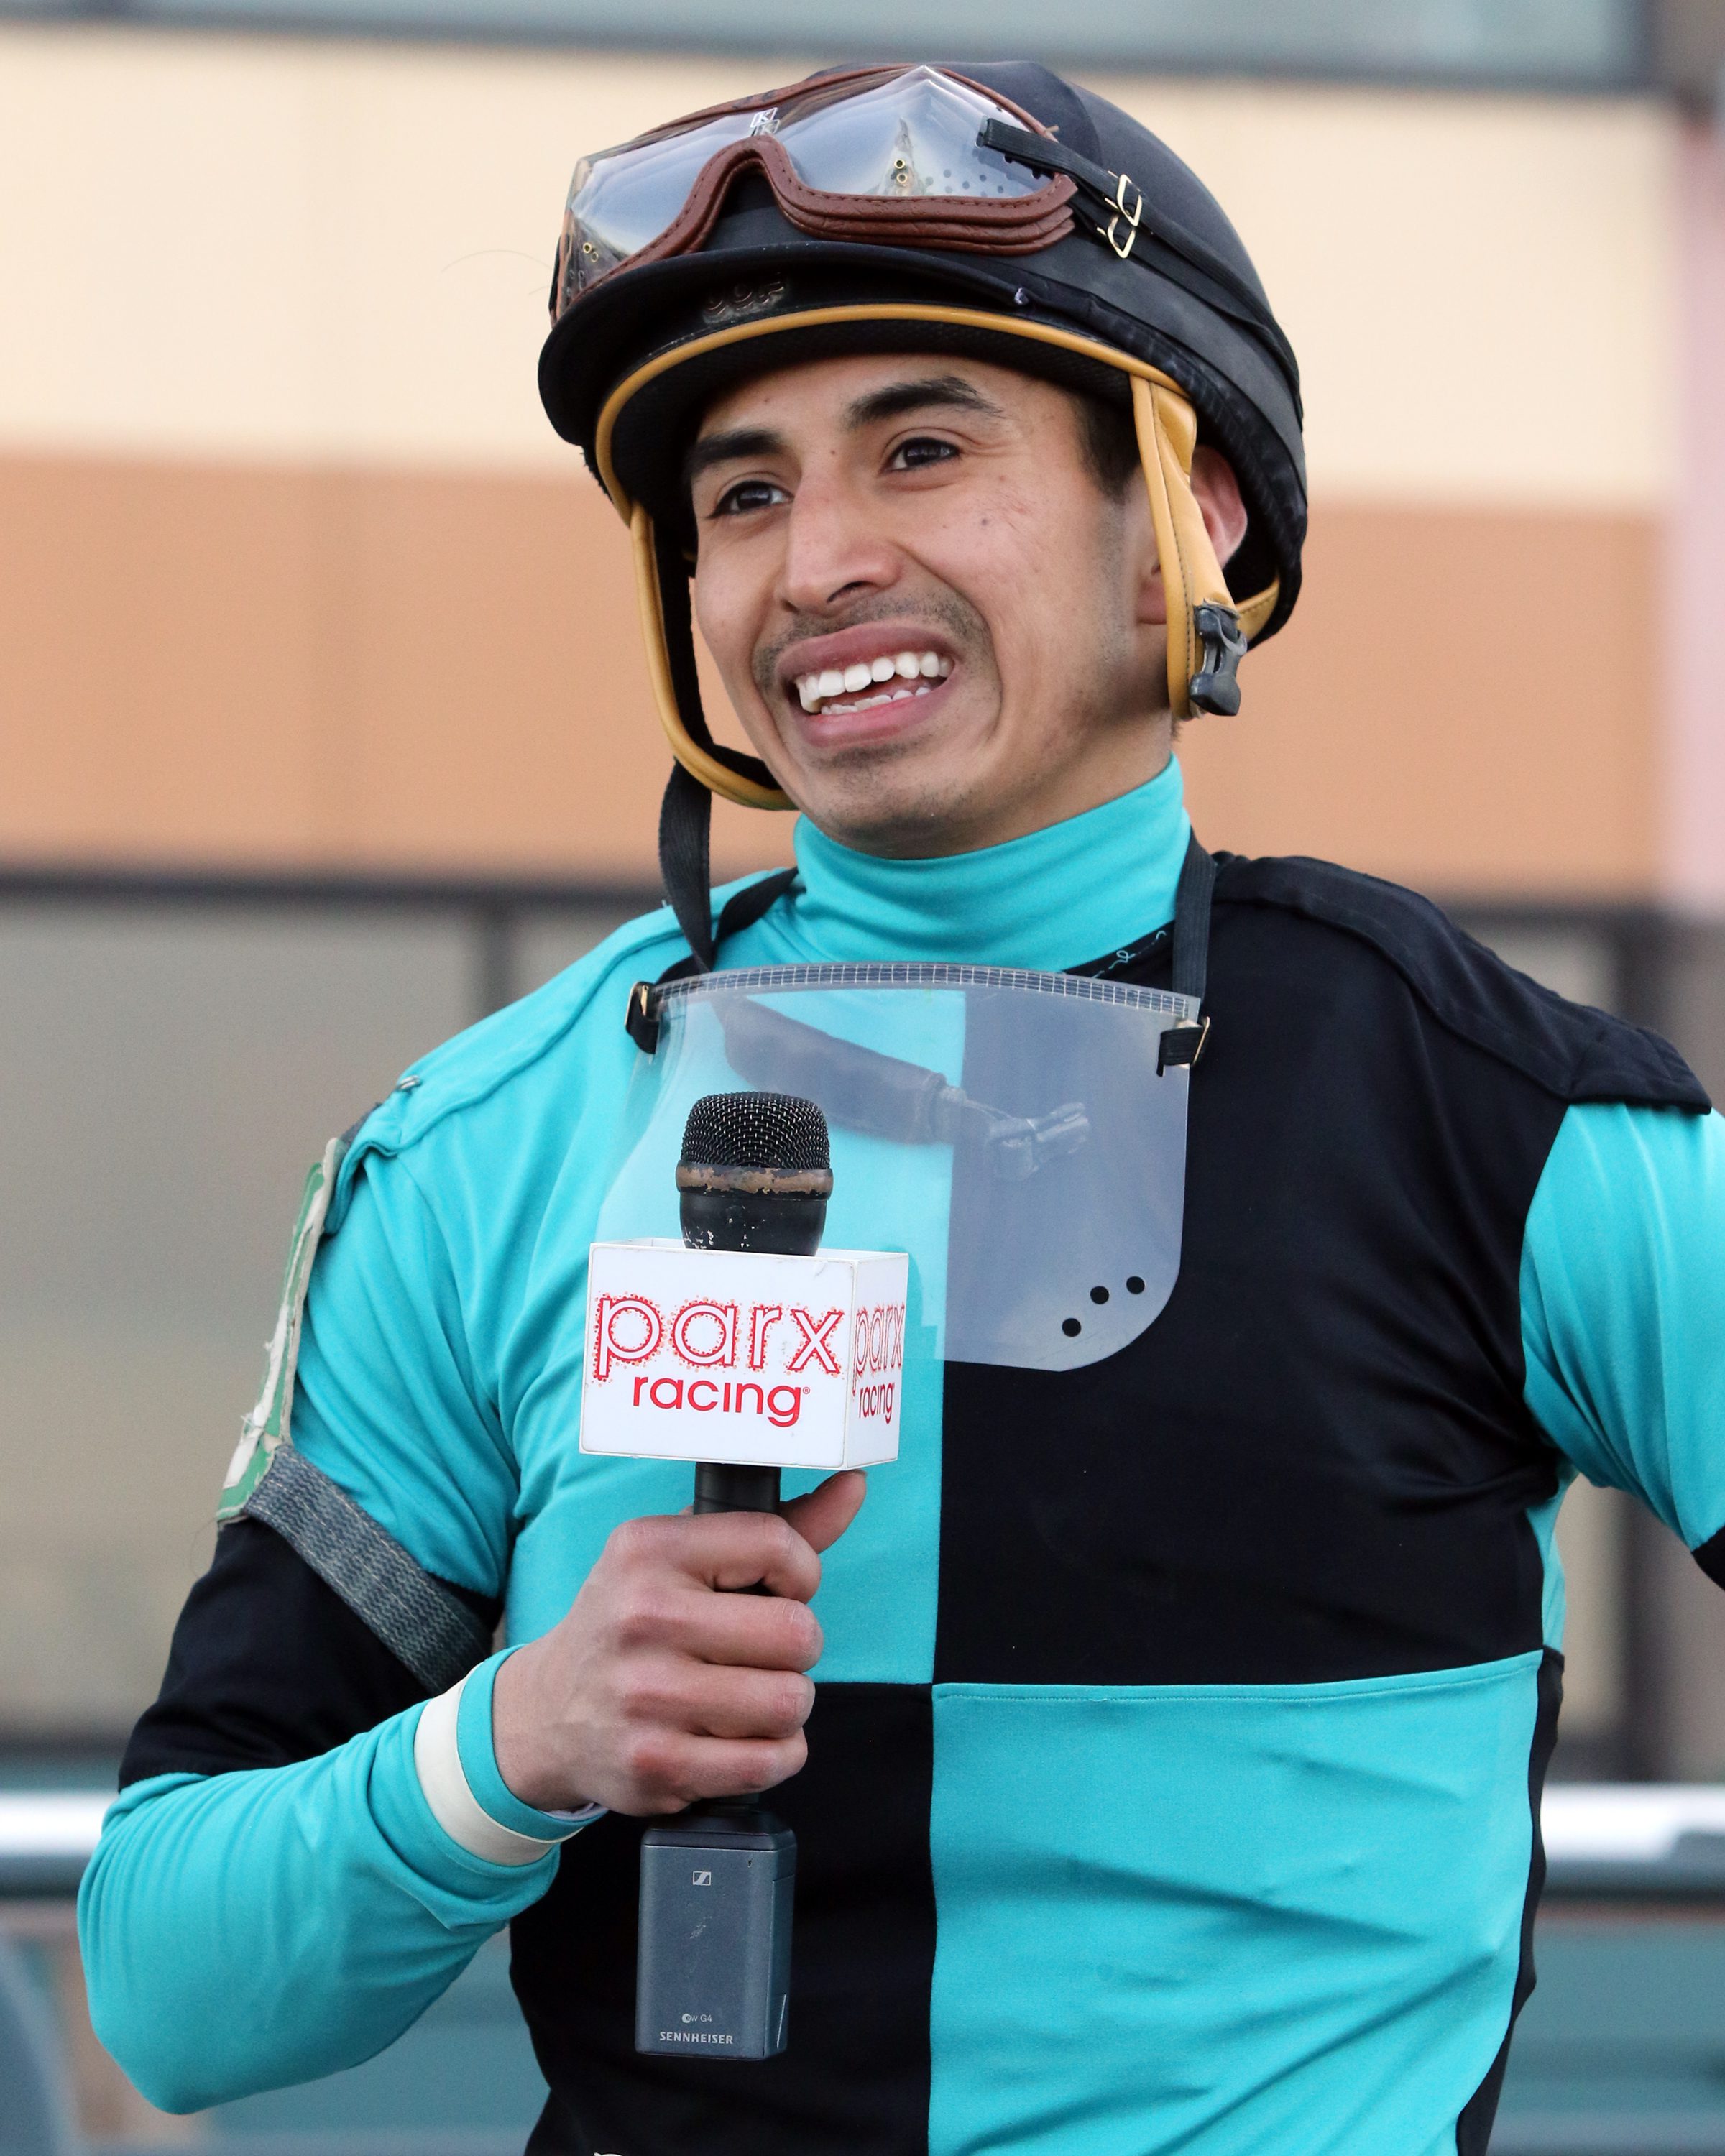 Silvestre Gonzalez after winning The Rittenhouse Square at Parx on March 8, 2022 aboard Scaramouche. Photo By: Chad B. Harmon